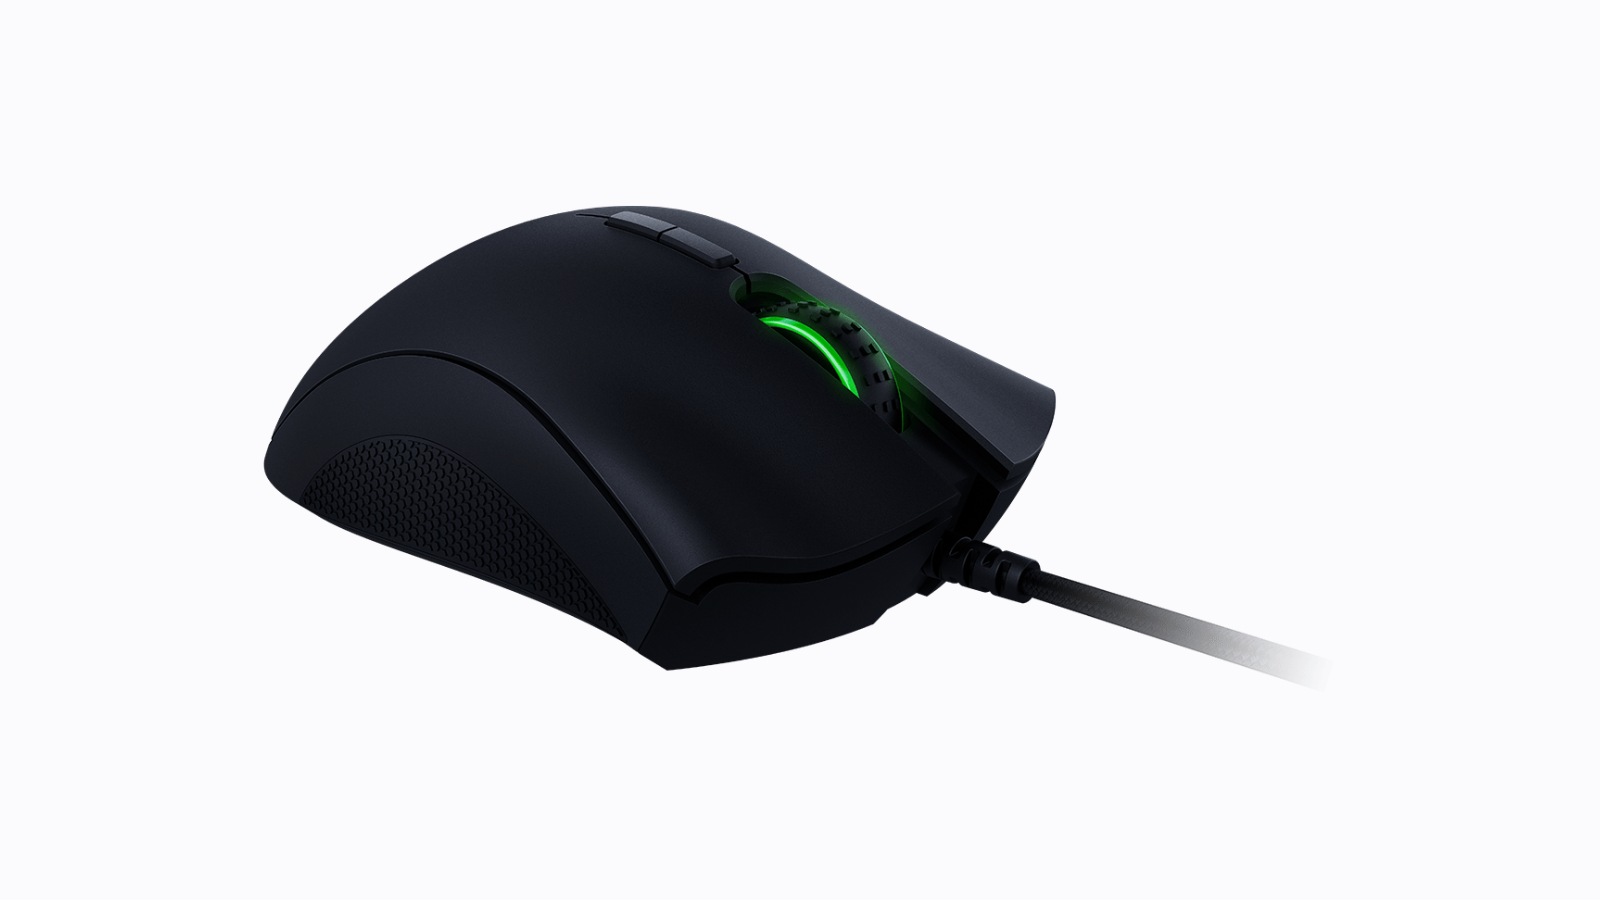 Right-Handed Palm and Claw Grip Mouse - The Razer DeathAdder Line